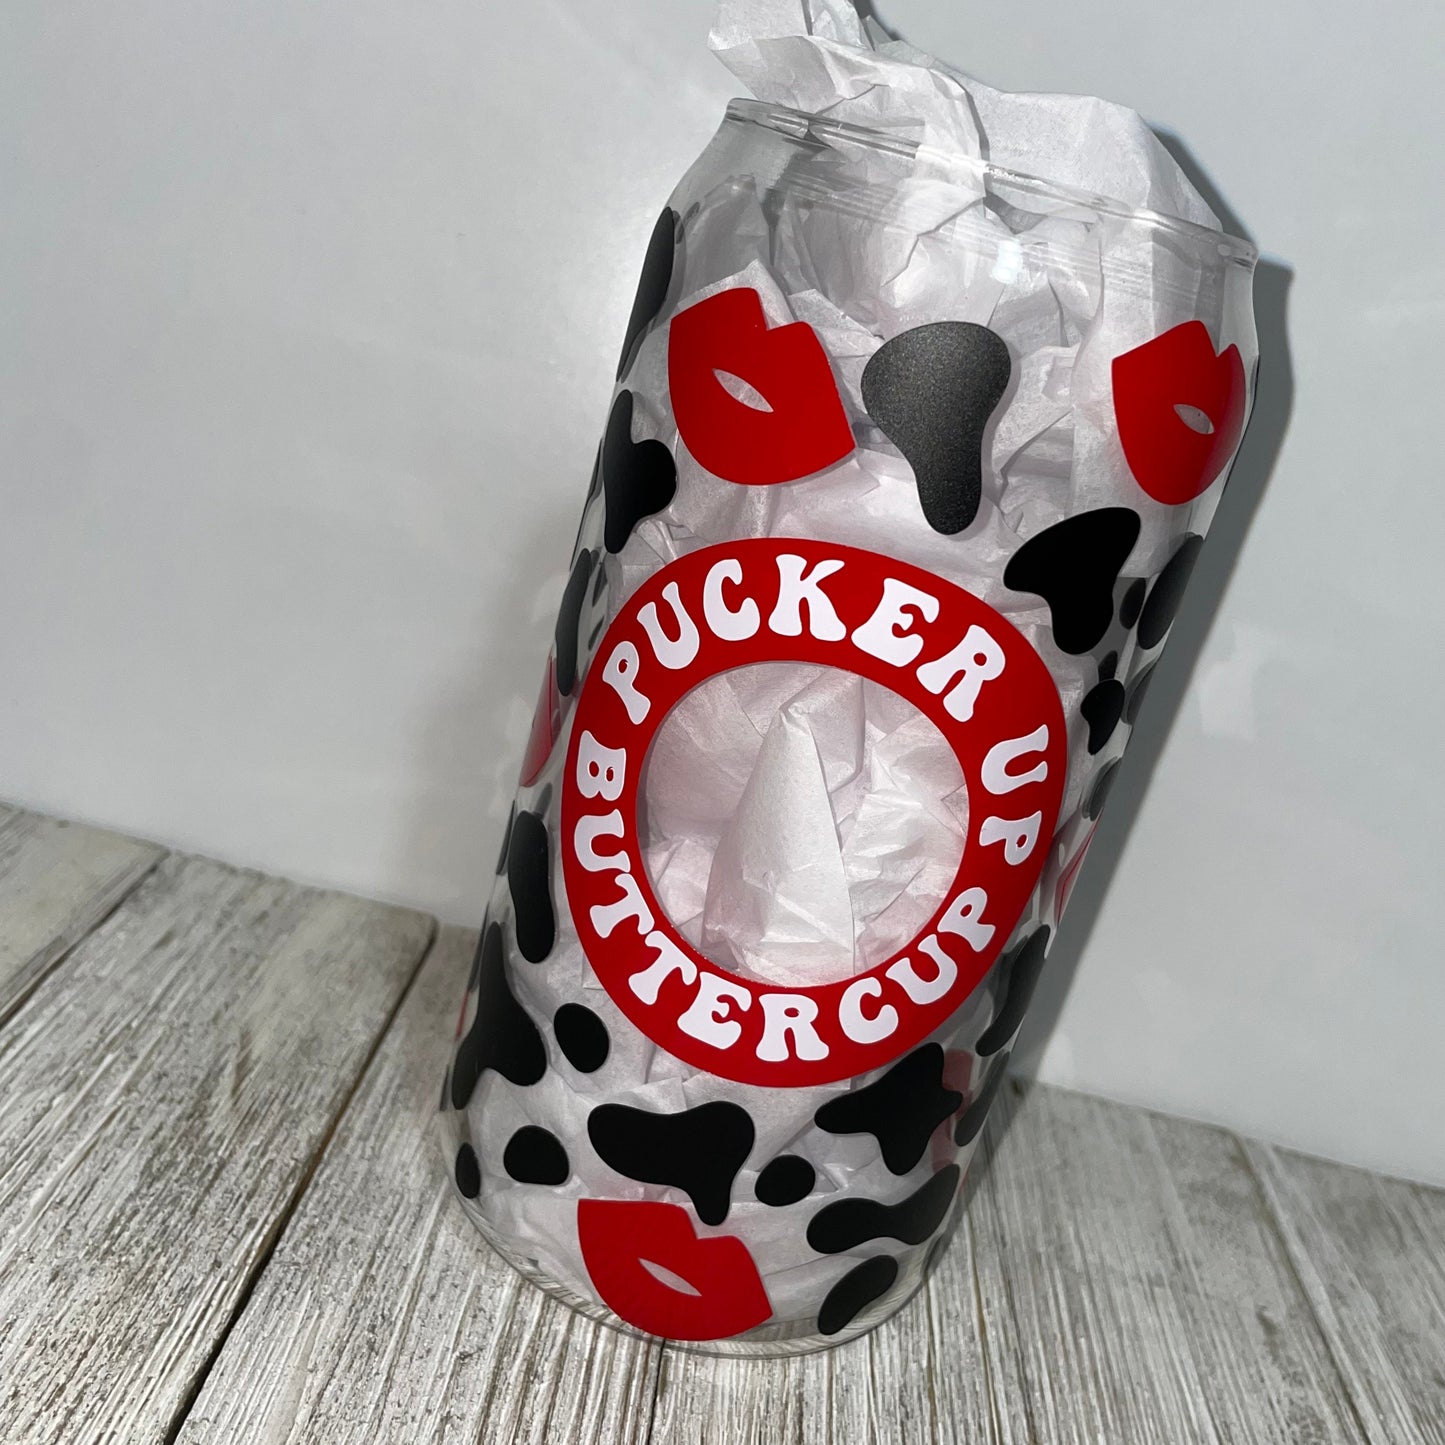 Pucker Up Buttercup Cow Print Glass Cup | 16oz Libby Glass Cup